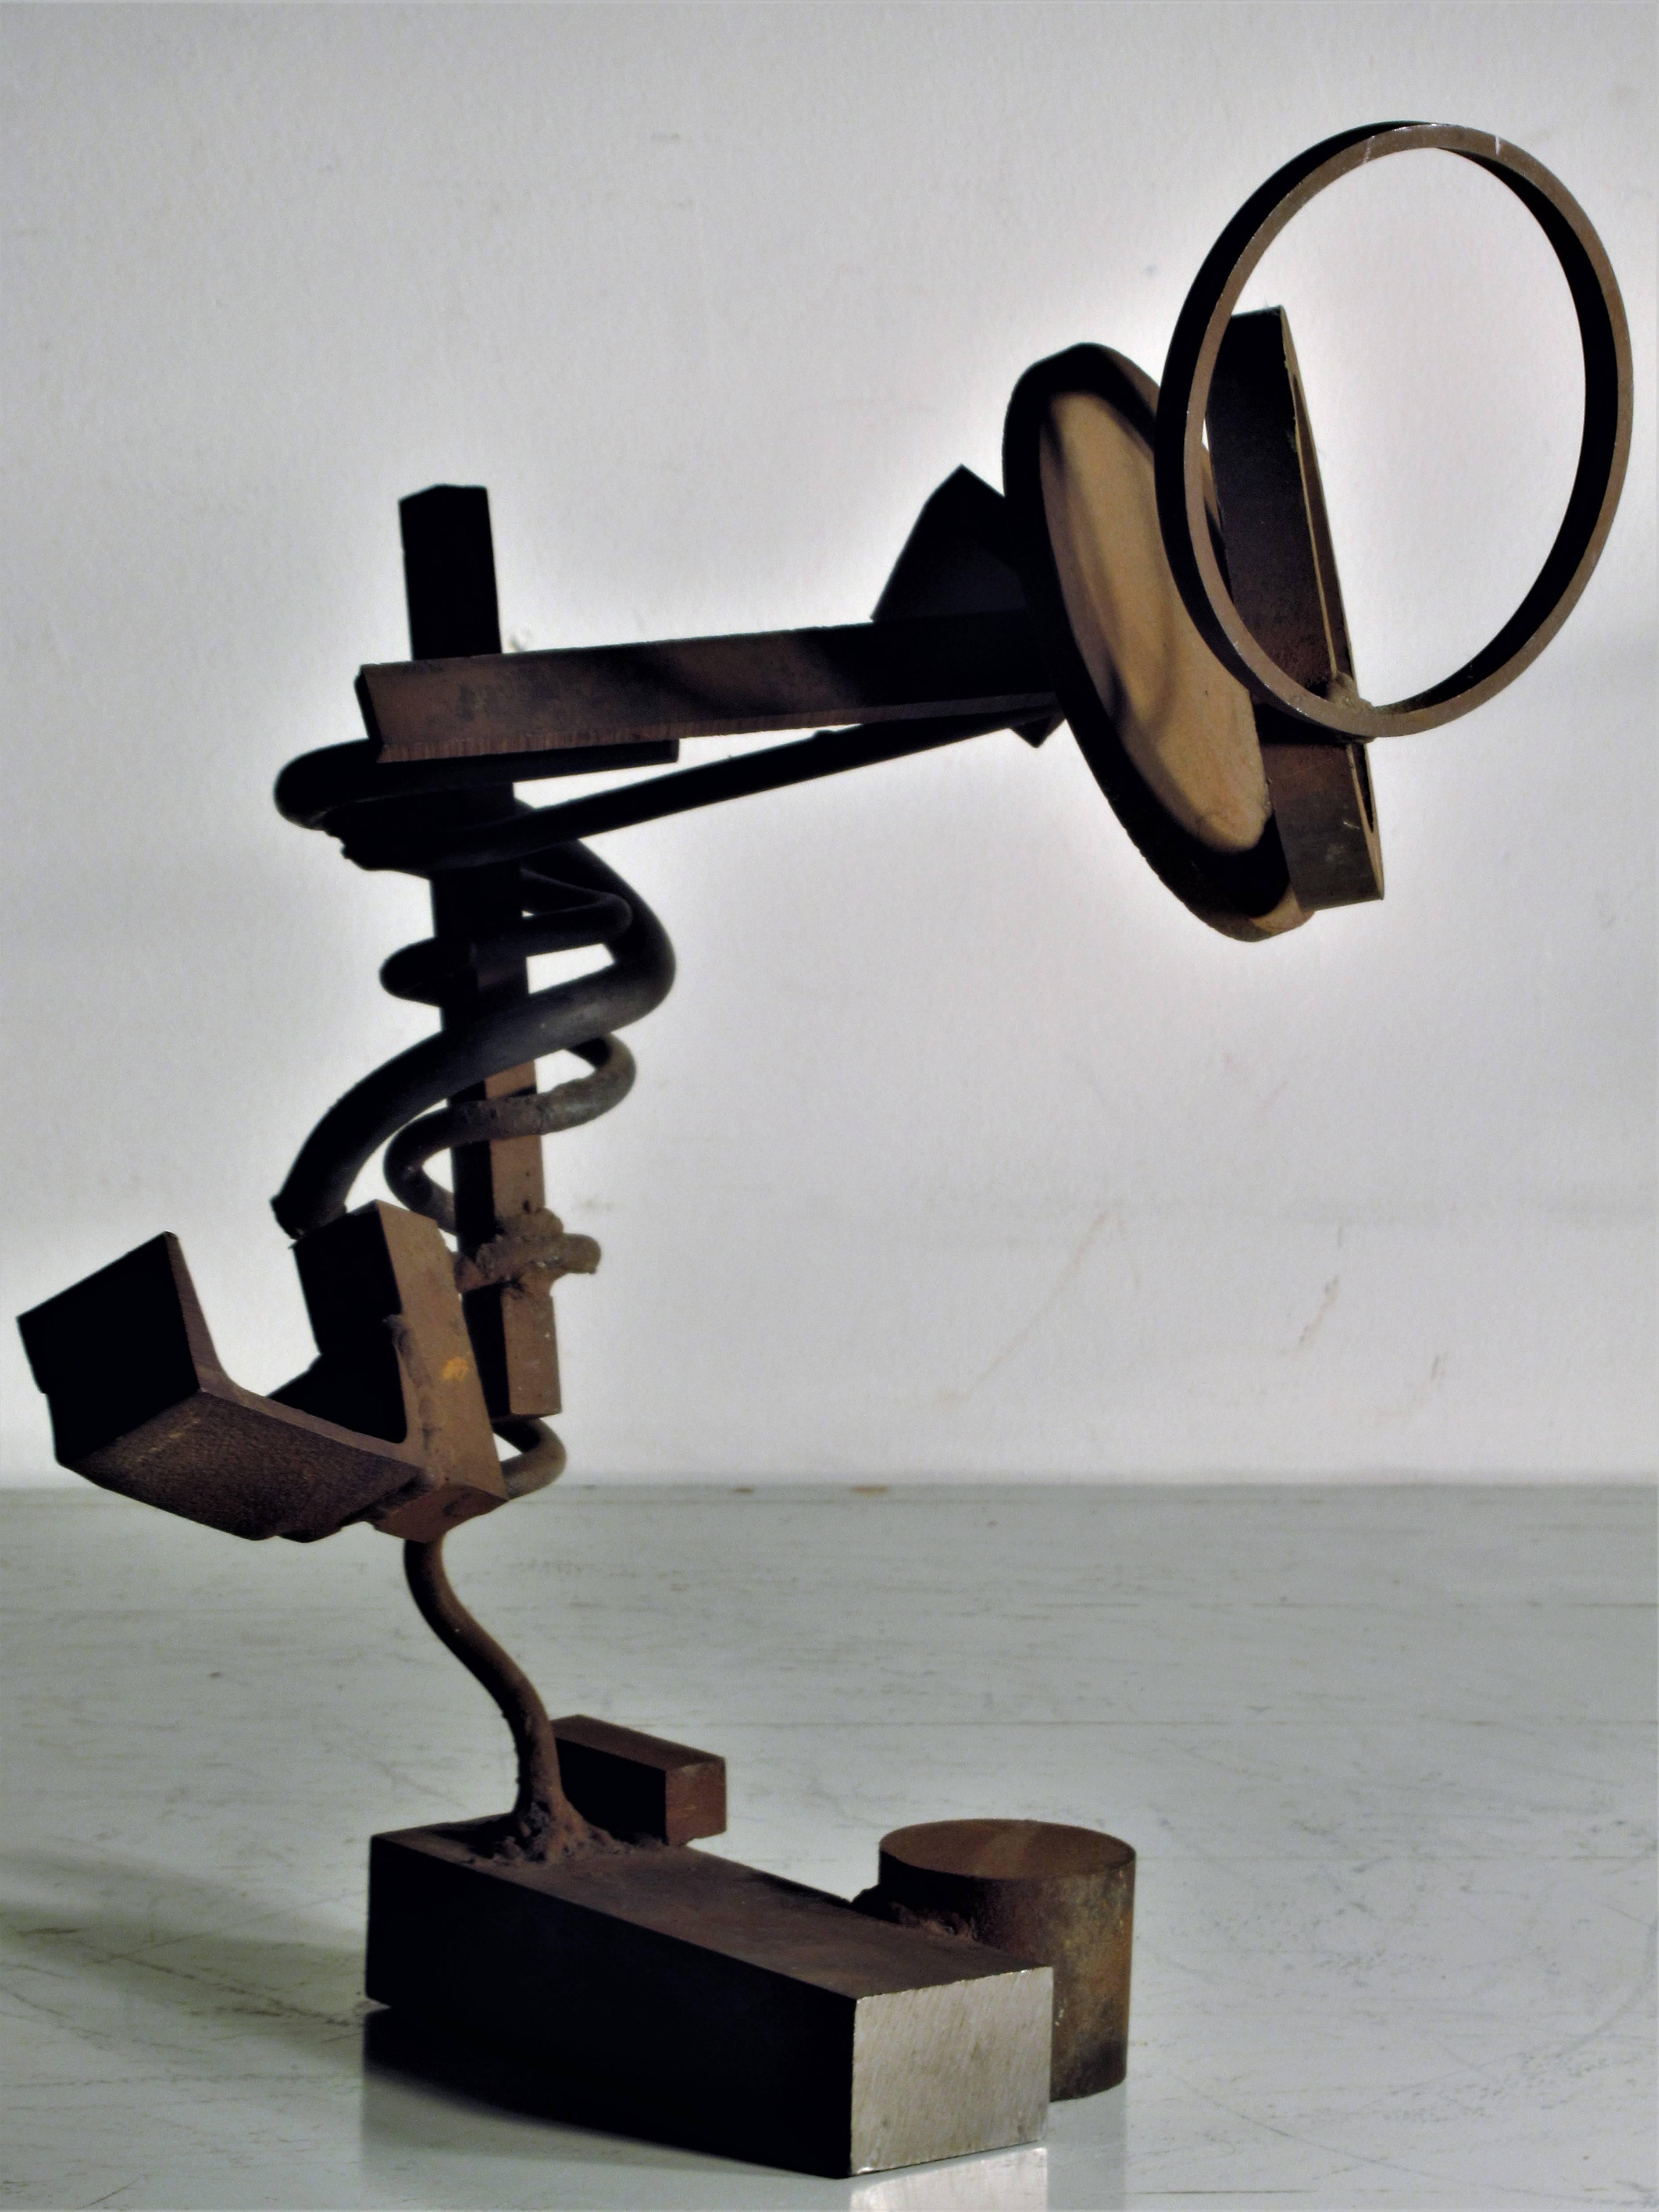   Steel Construction Sculpture by William Sellers 9